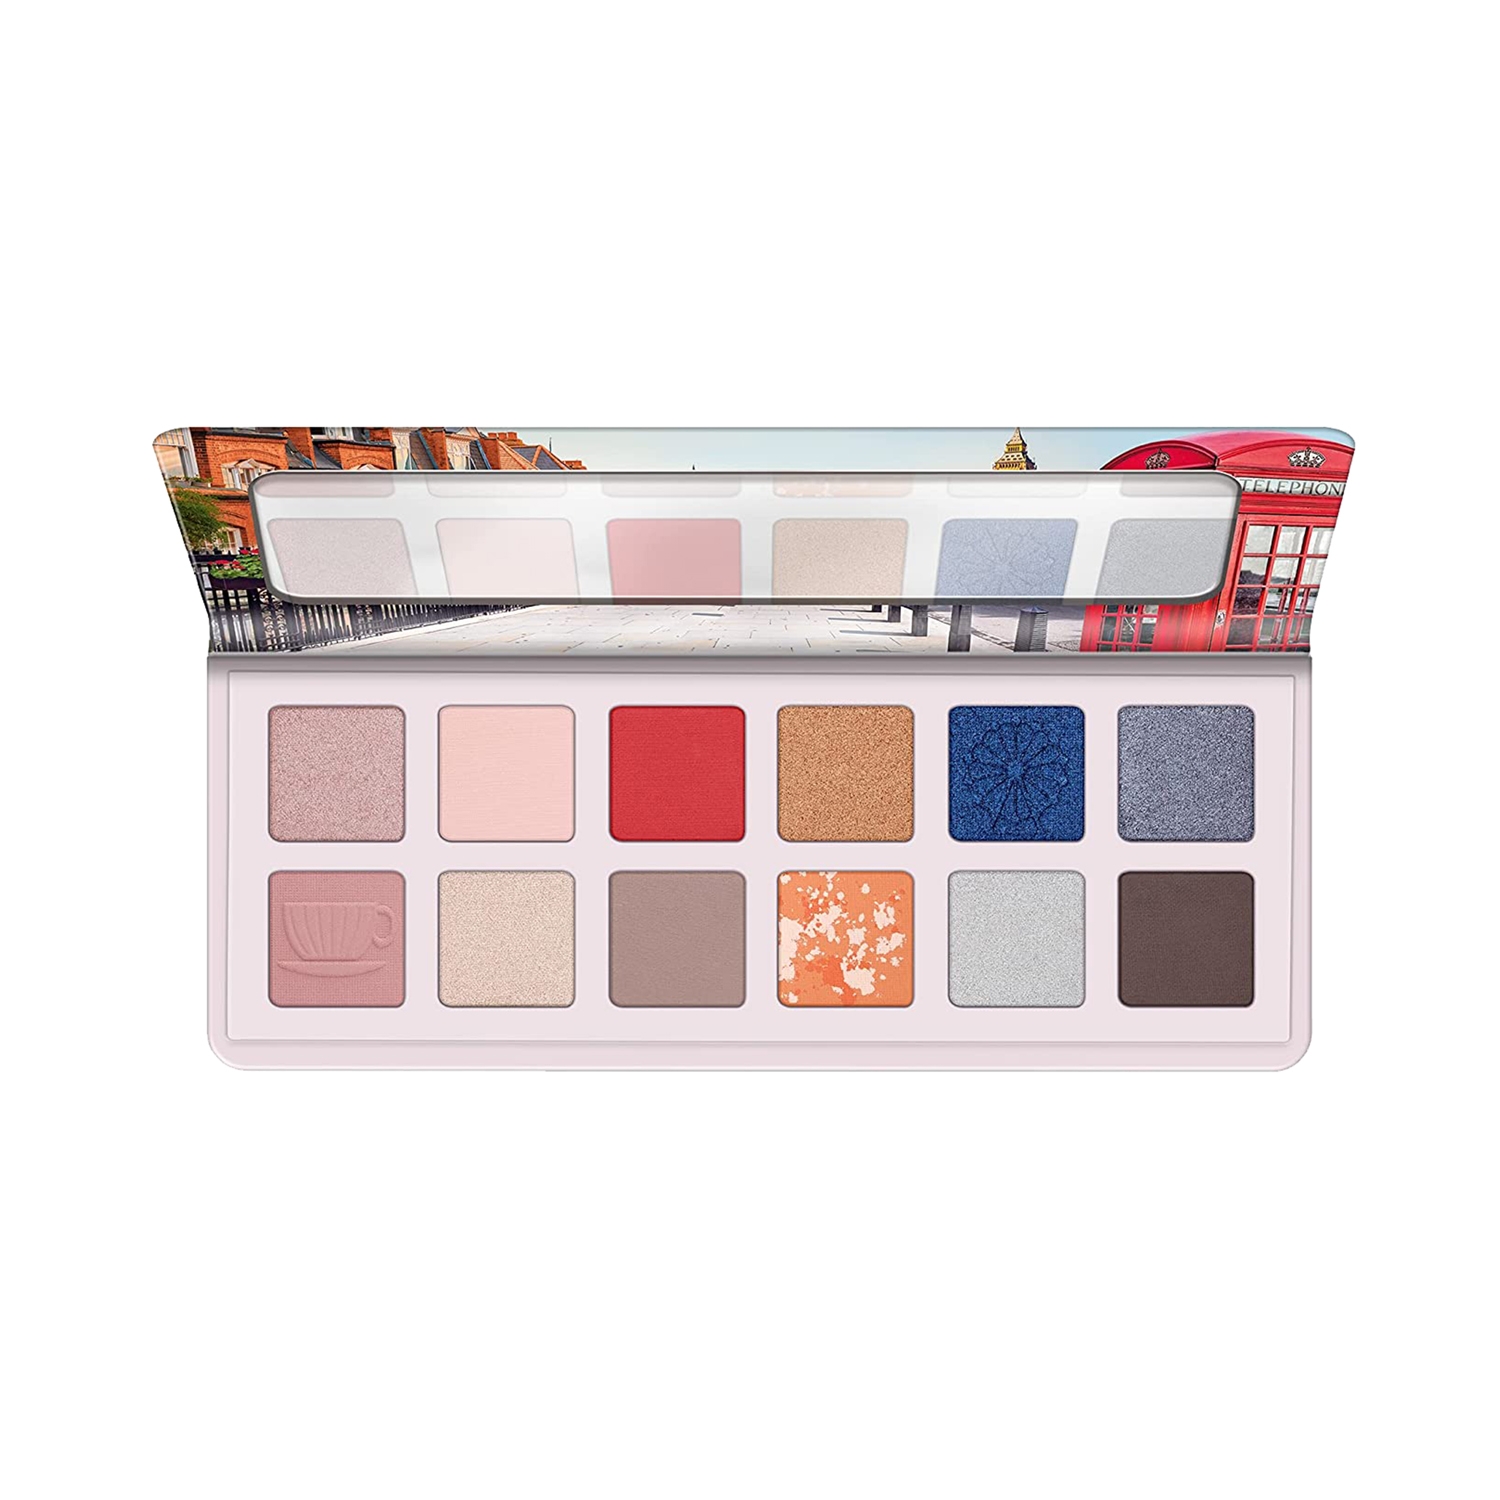 Essence | Essence Welcome To London Eyeshadow Palette - Multicolor (13.2g)